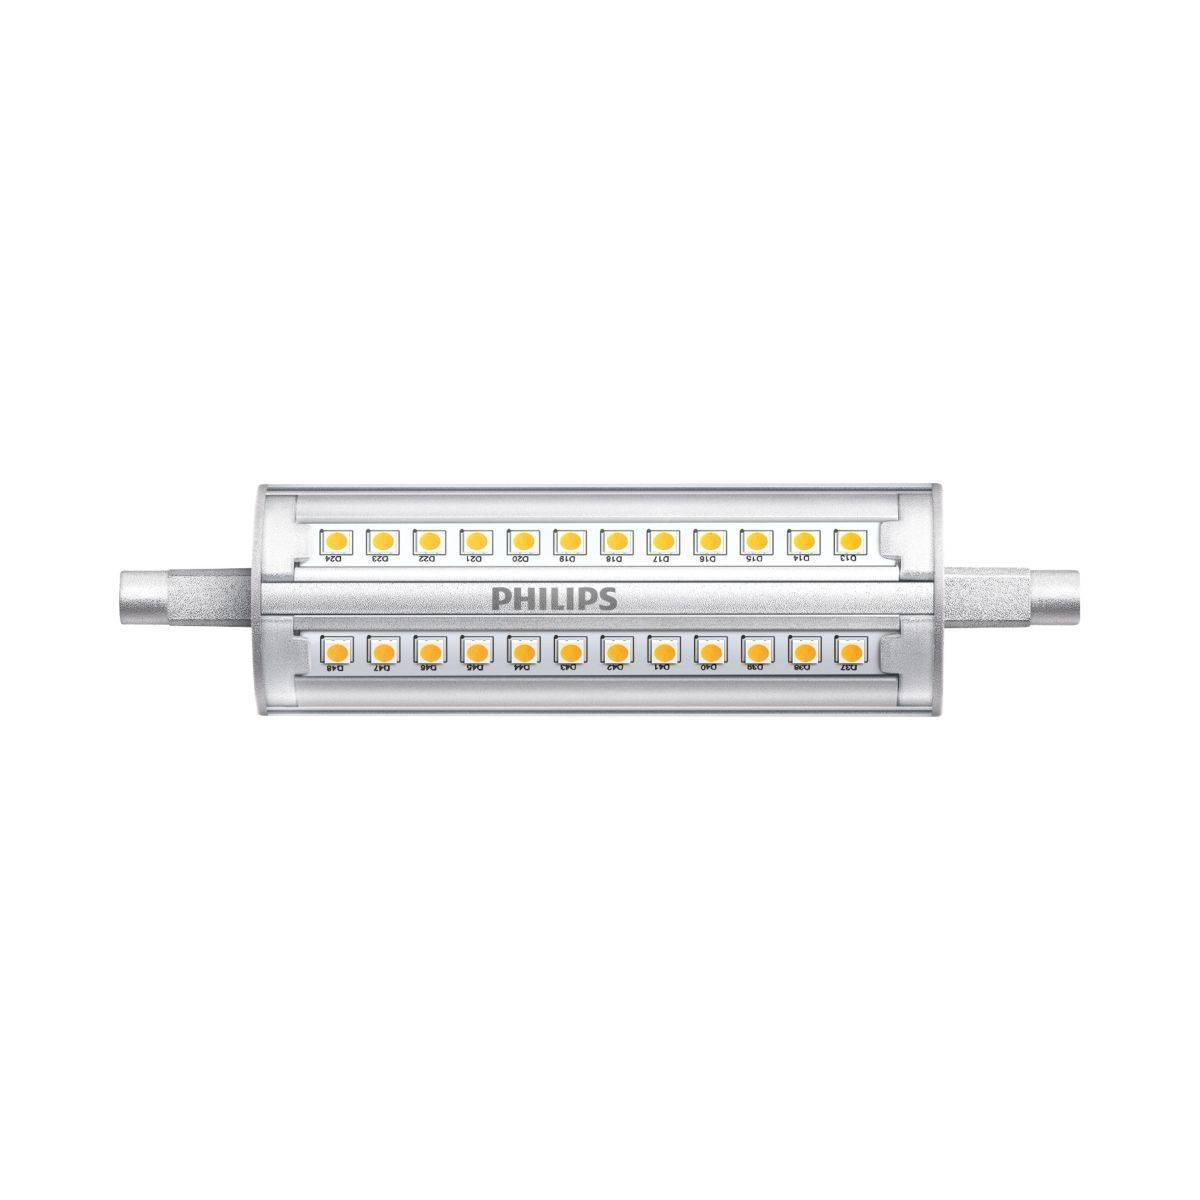 Lampadina LED R7S dimmerabile 14W 1600lm - CorePro LED lineare R7S Philips